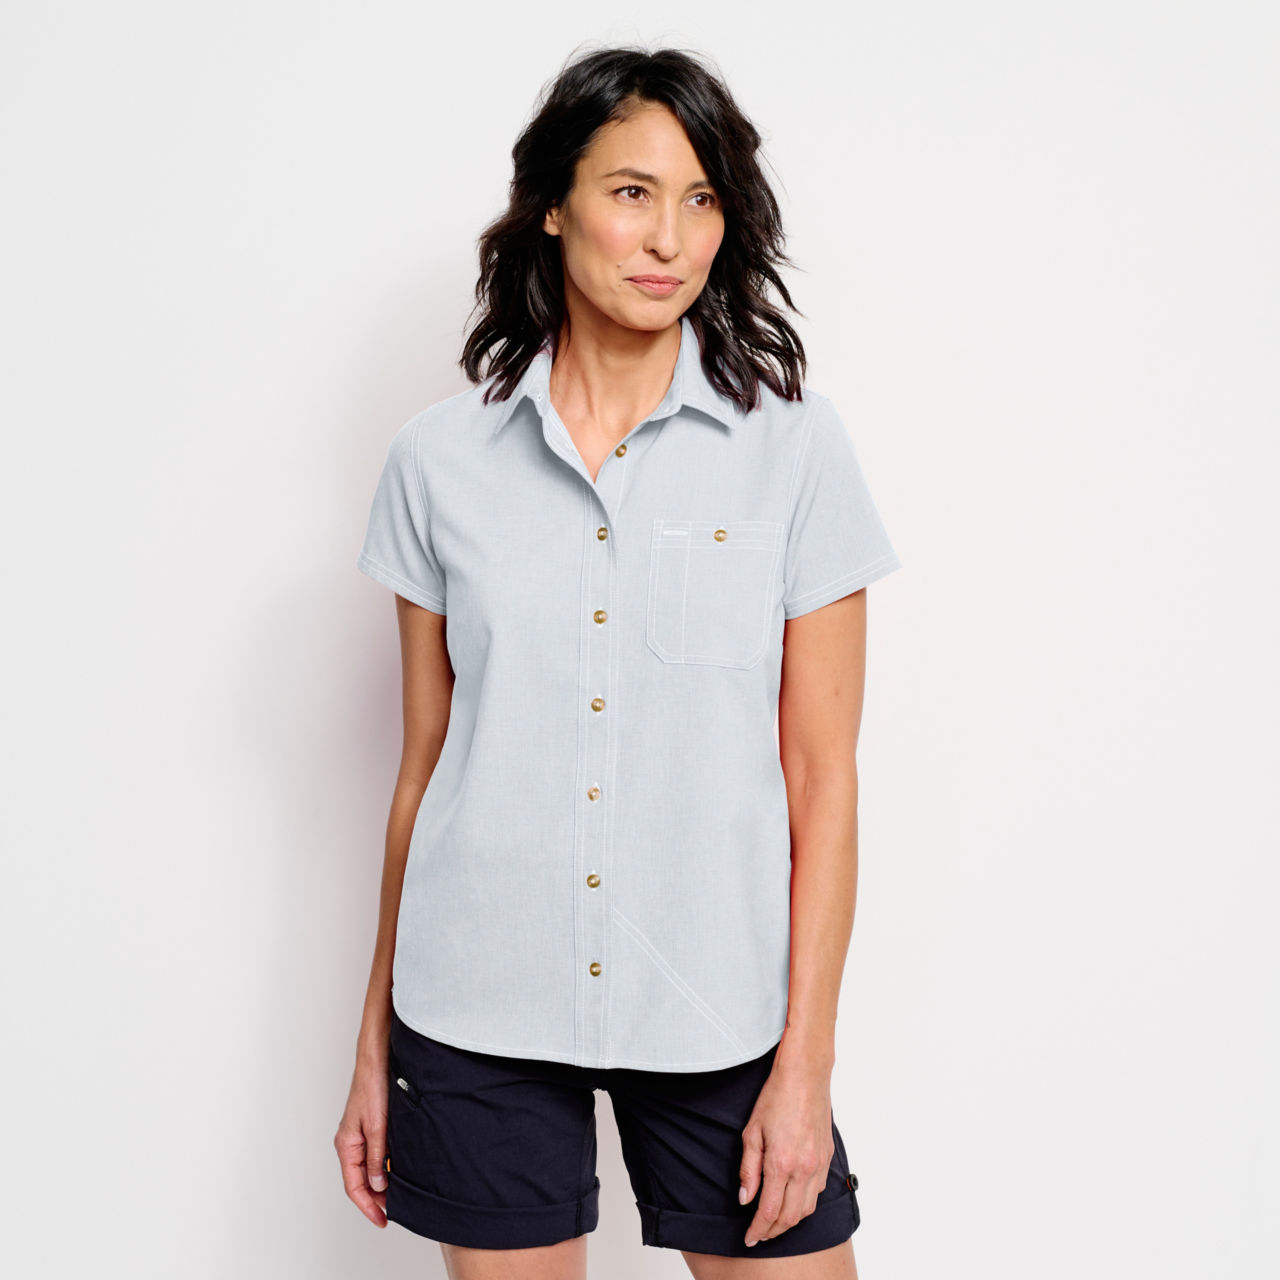 Women’s Tech Chambray Short-Sleeved Work Shirt -  image number 0